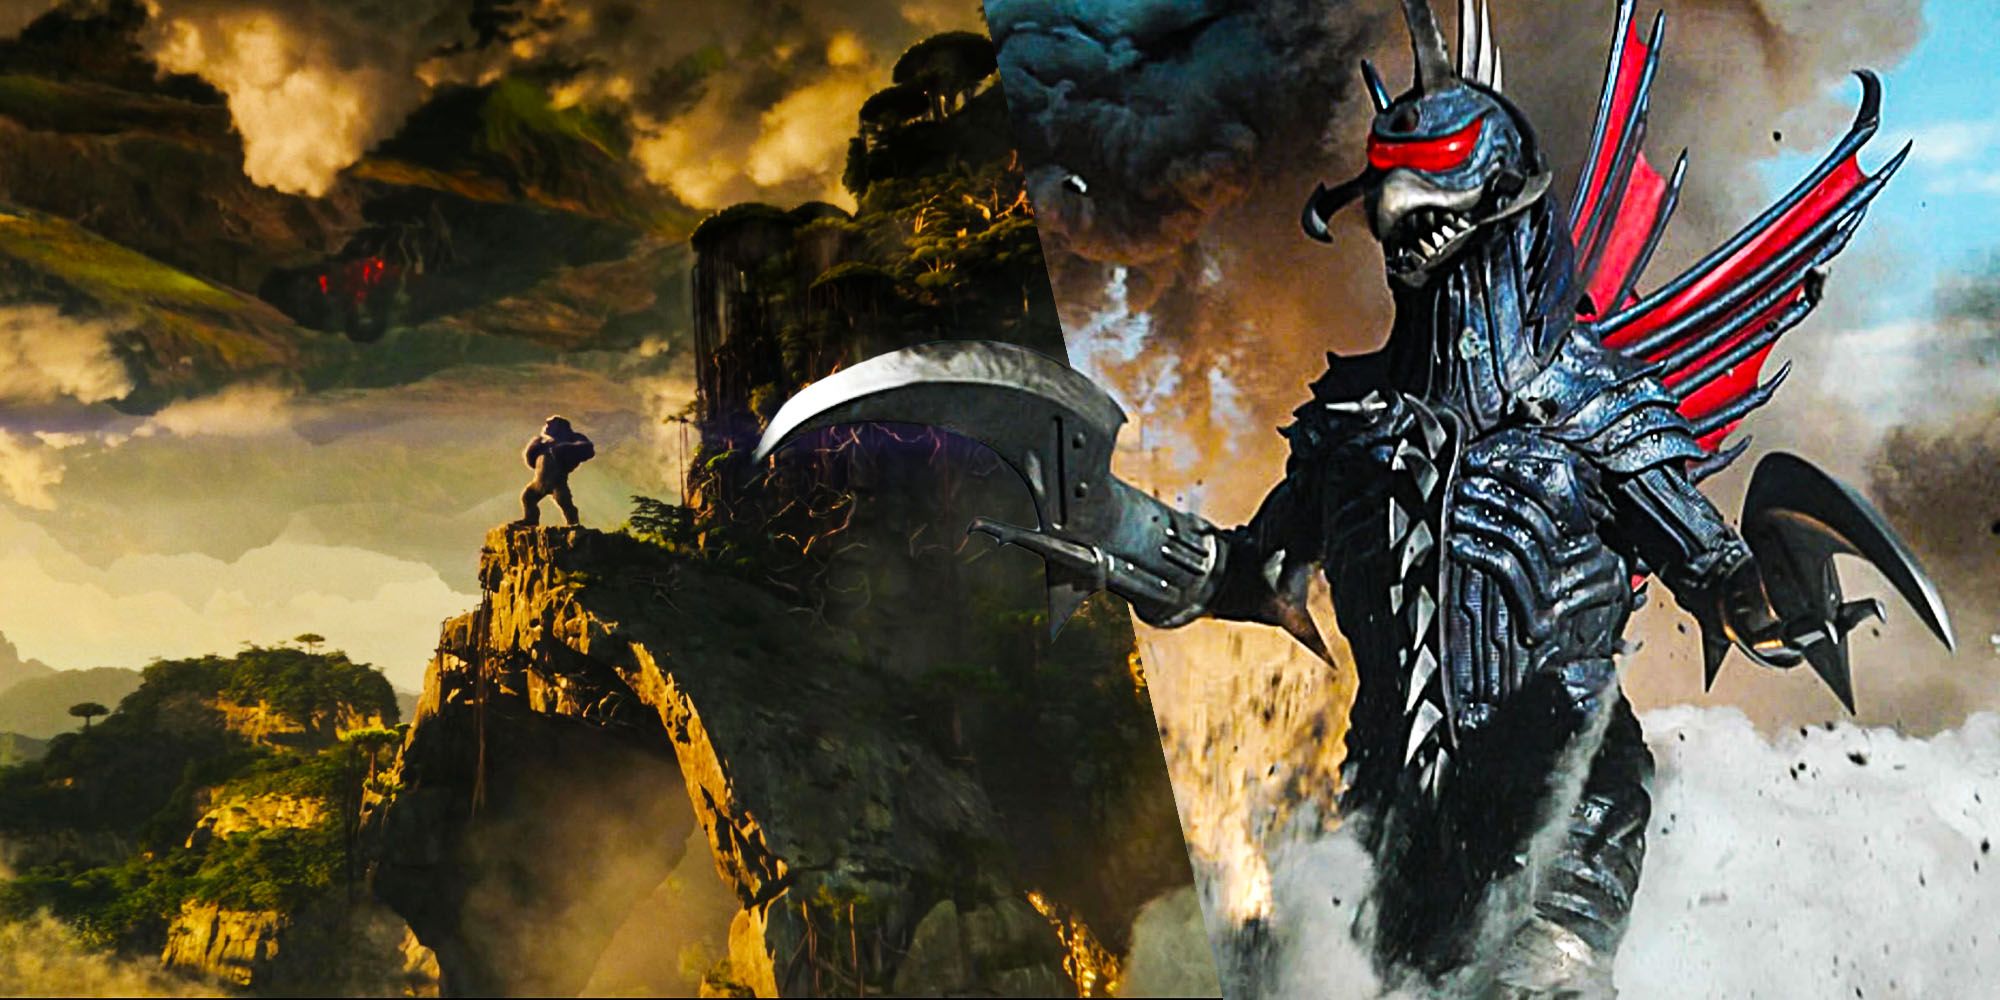 Godzilla Why Gigan Could Already Be On MonsterVerses Earth (& Where)